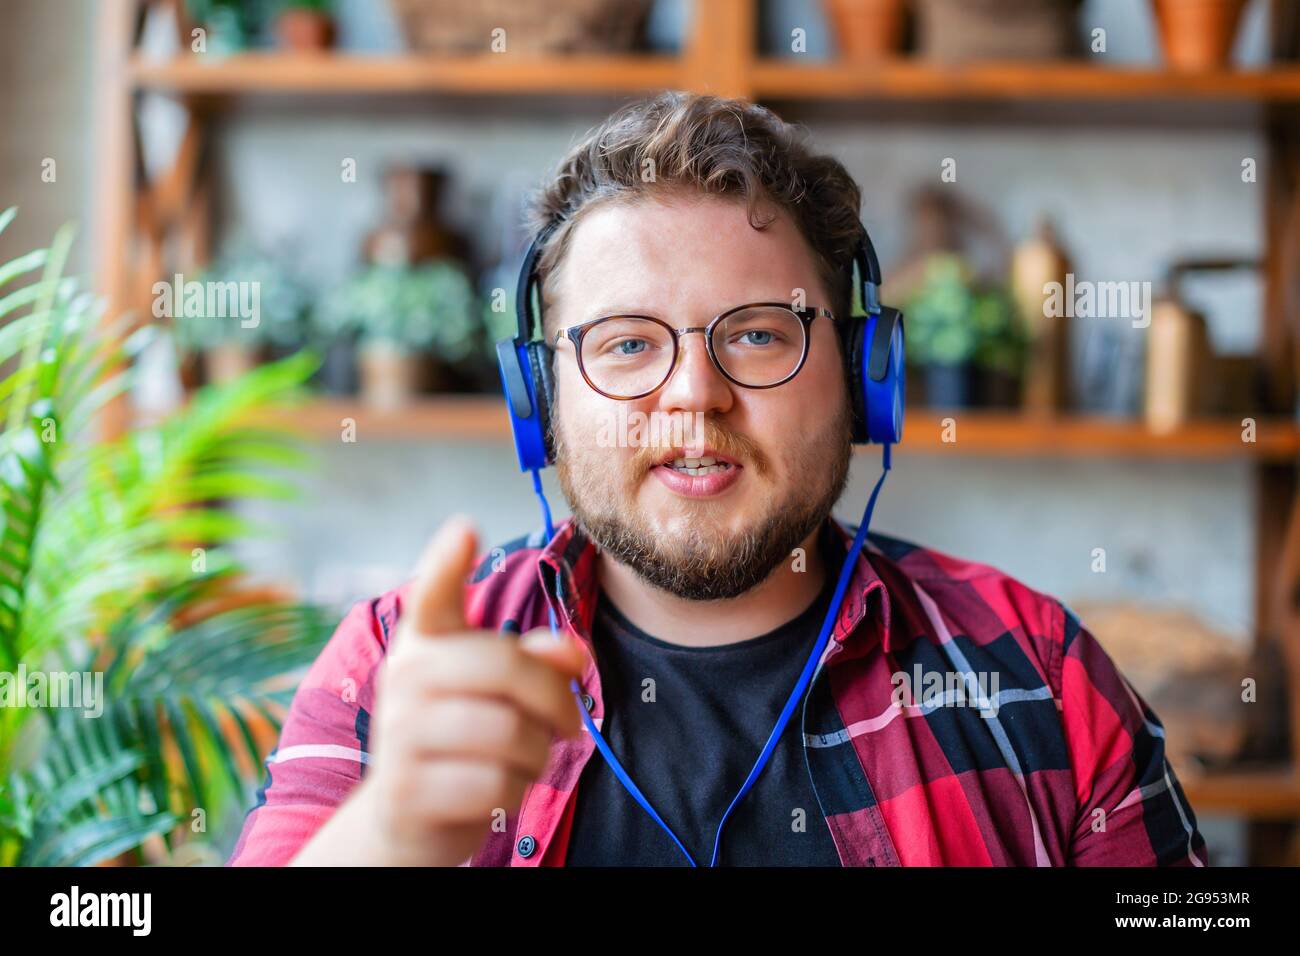 Photo of a young man in a blue headphones or headset during online video call. Online meeting with friends or relatives. He looking at camera and gest Stock Photo